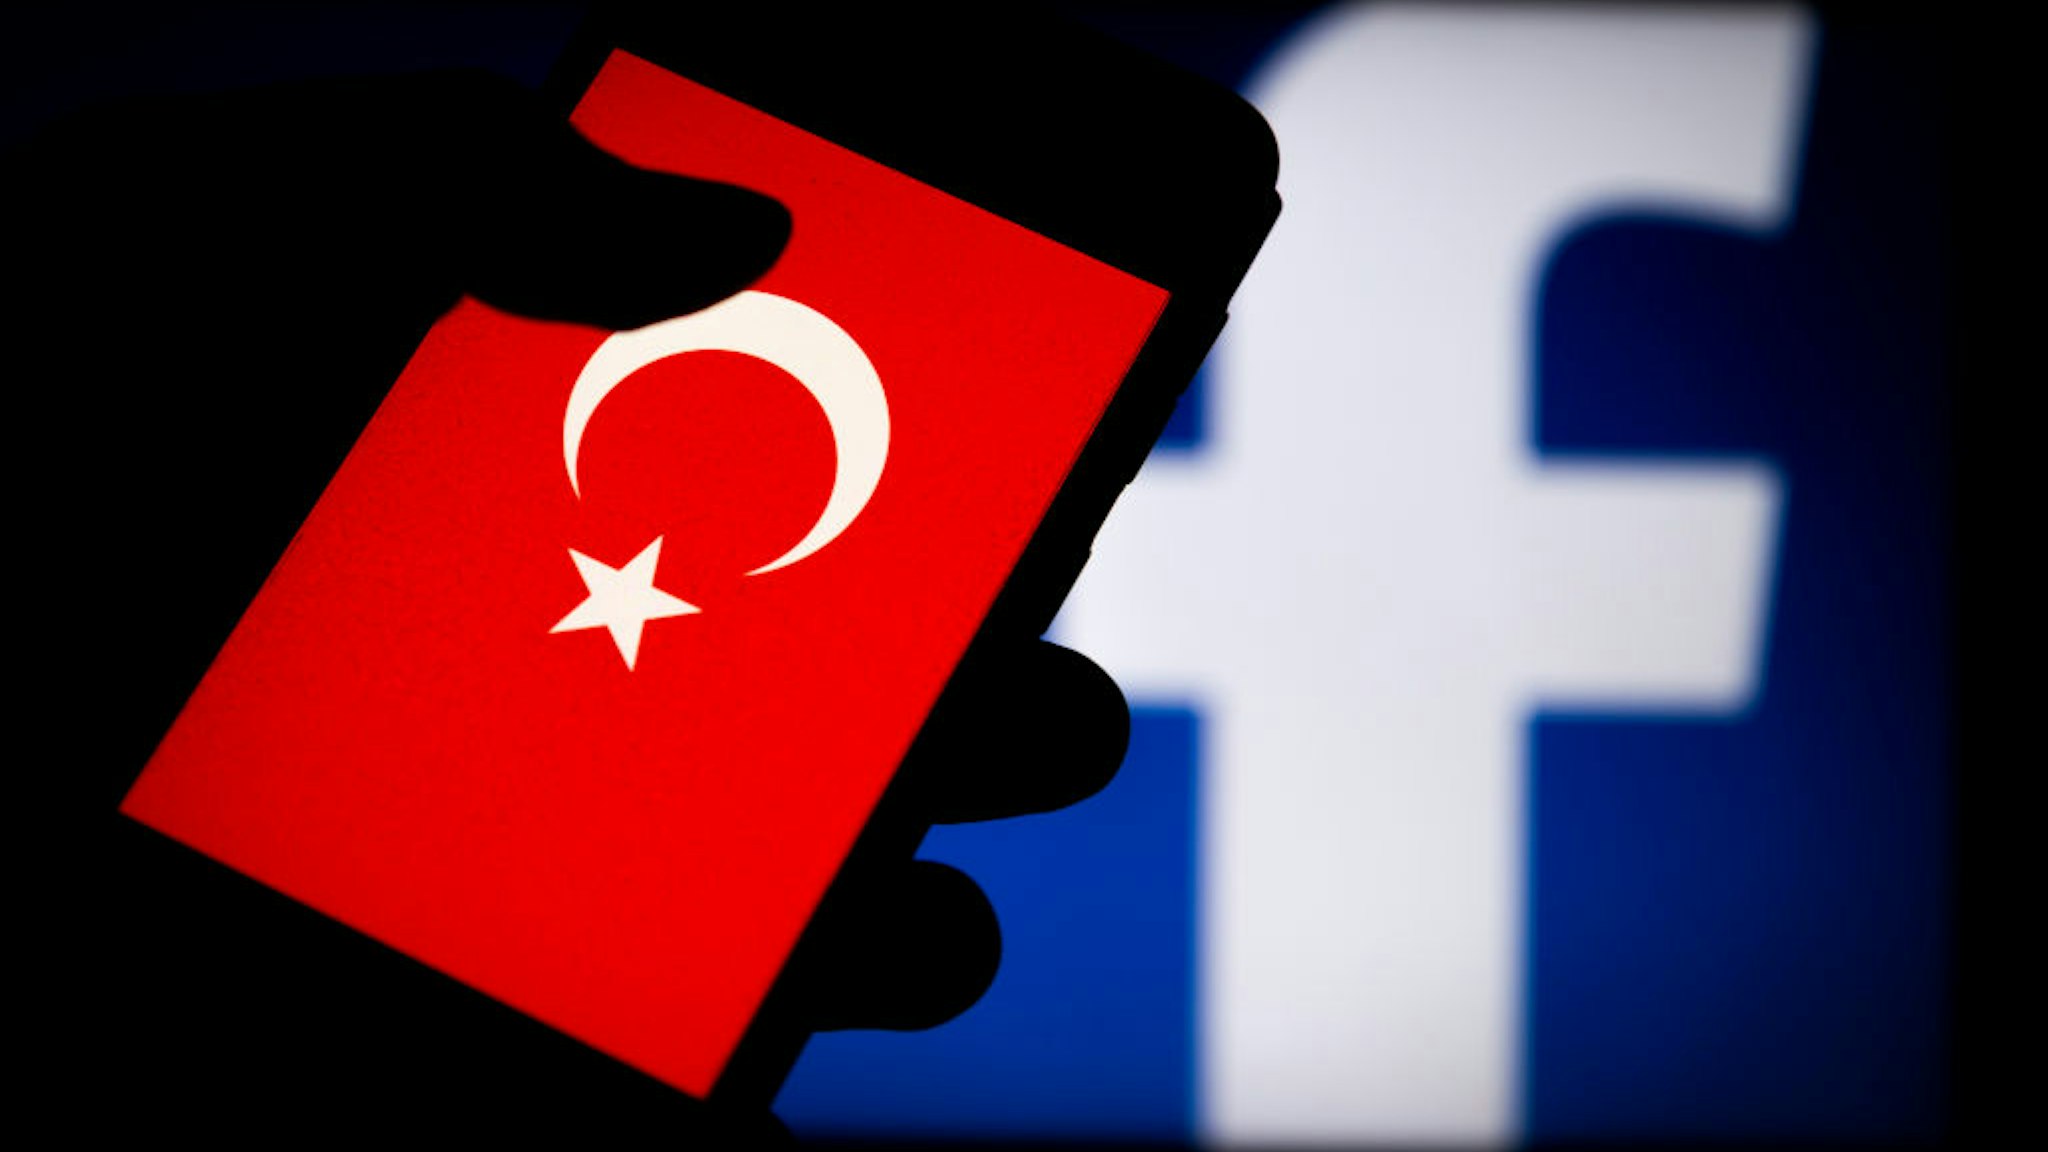 In this photo illustration a Turkish flag is seen displayed on a smartphone with a Facebook logo in the background.